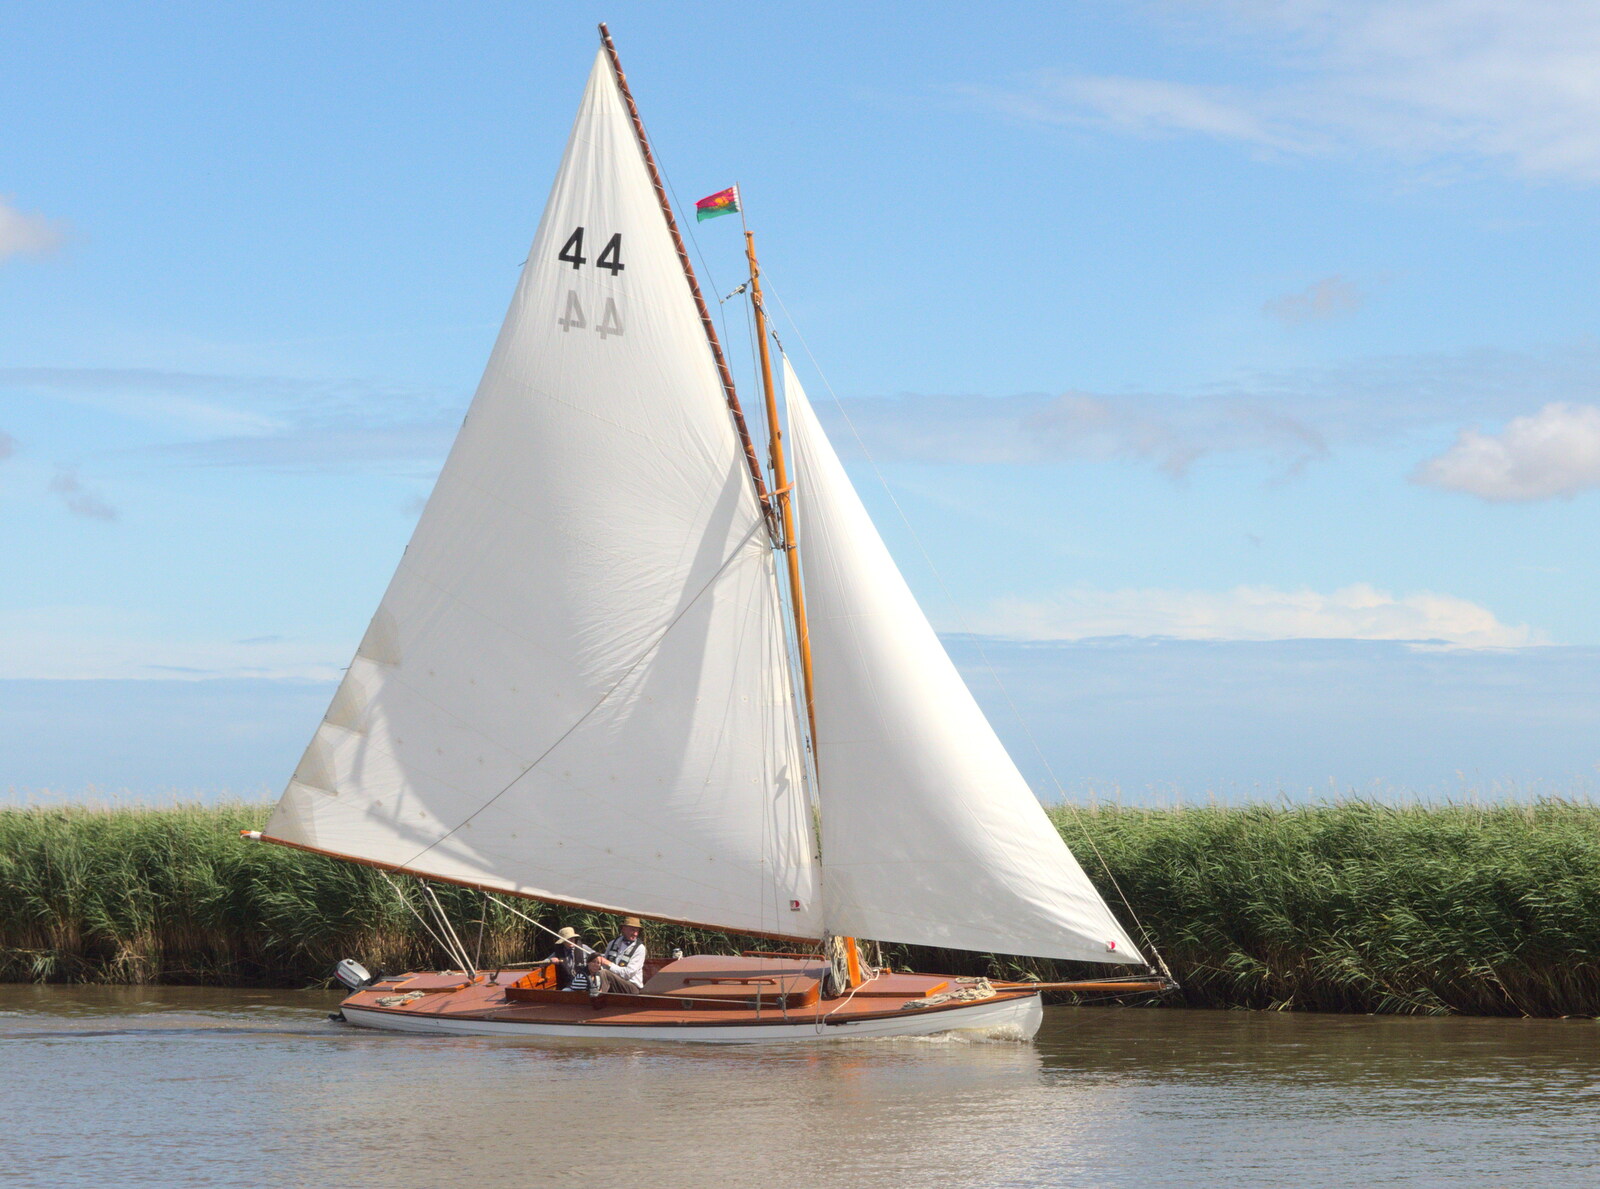 A lovely old yacht luffs its way up the river from The Humpty Dumpty Beer Festival, Reedham, Norfolk - 22nd July 2017